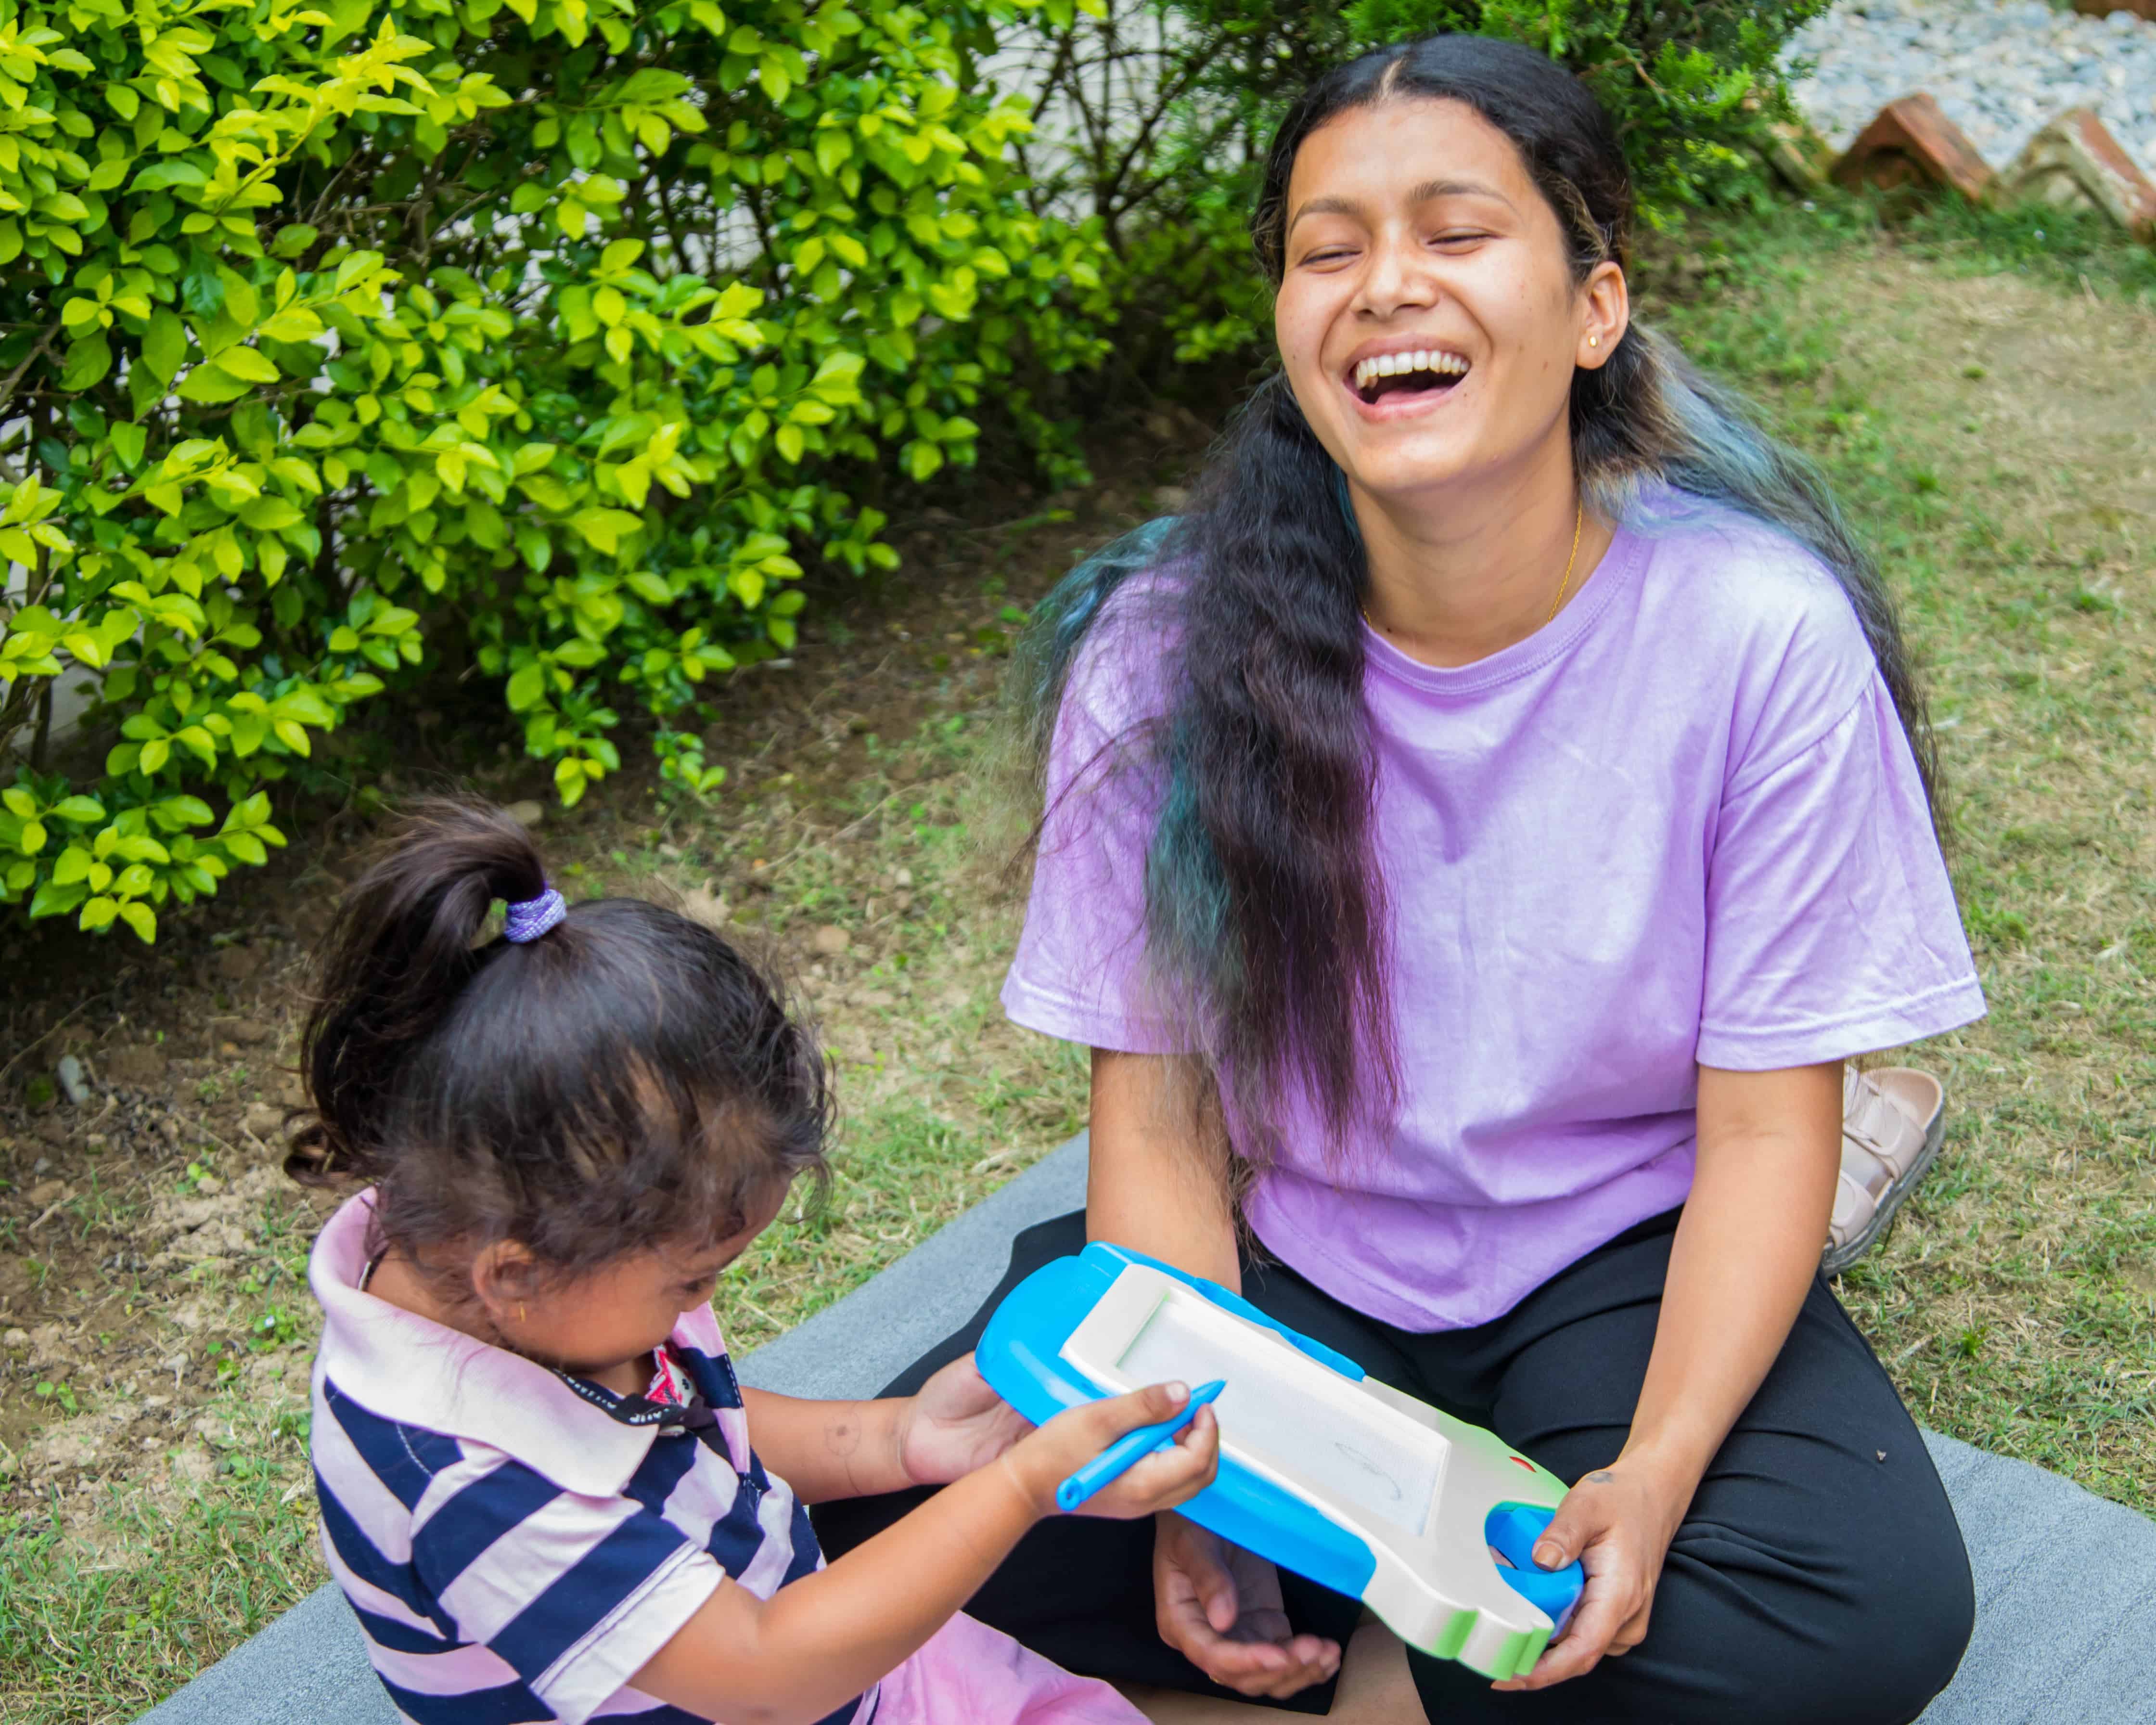 Urmila, age 20, learns child care skills during an early childhood development training.